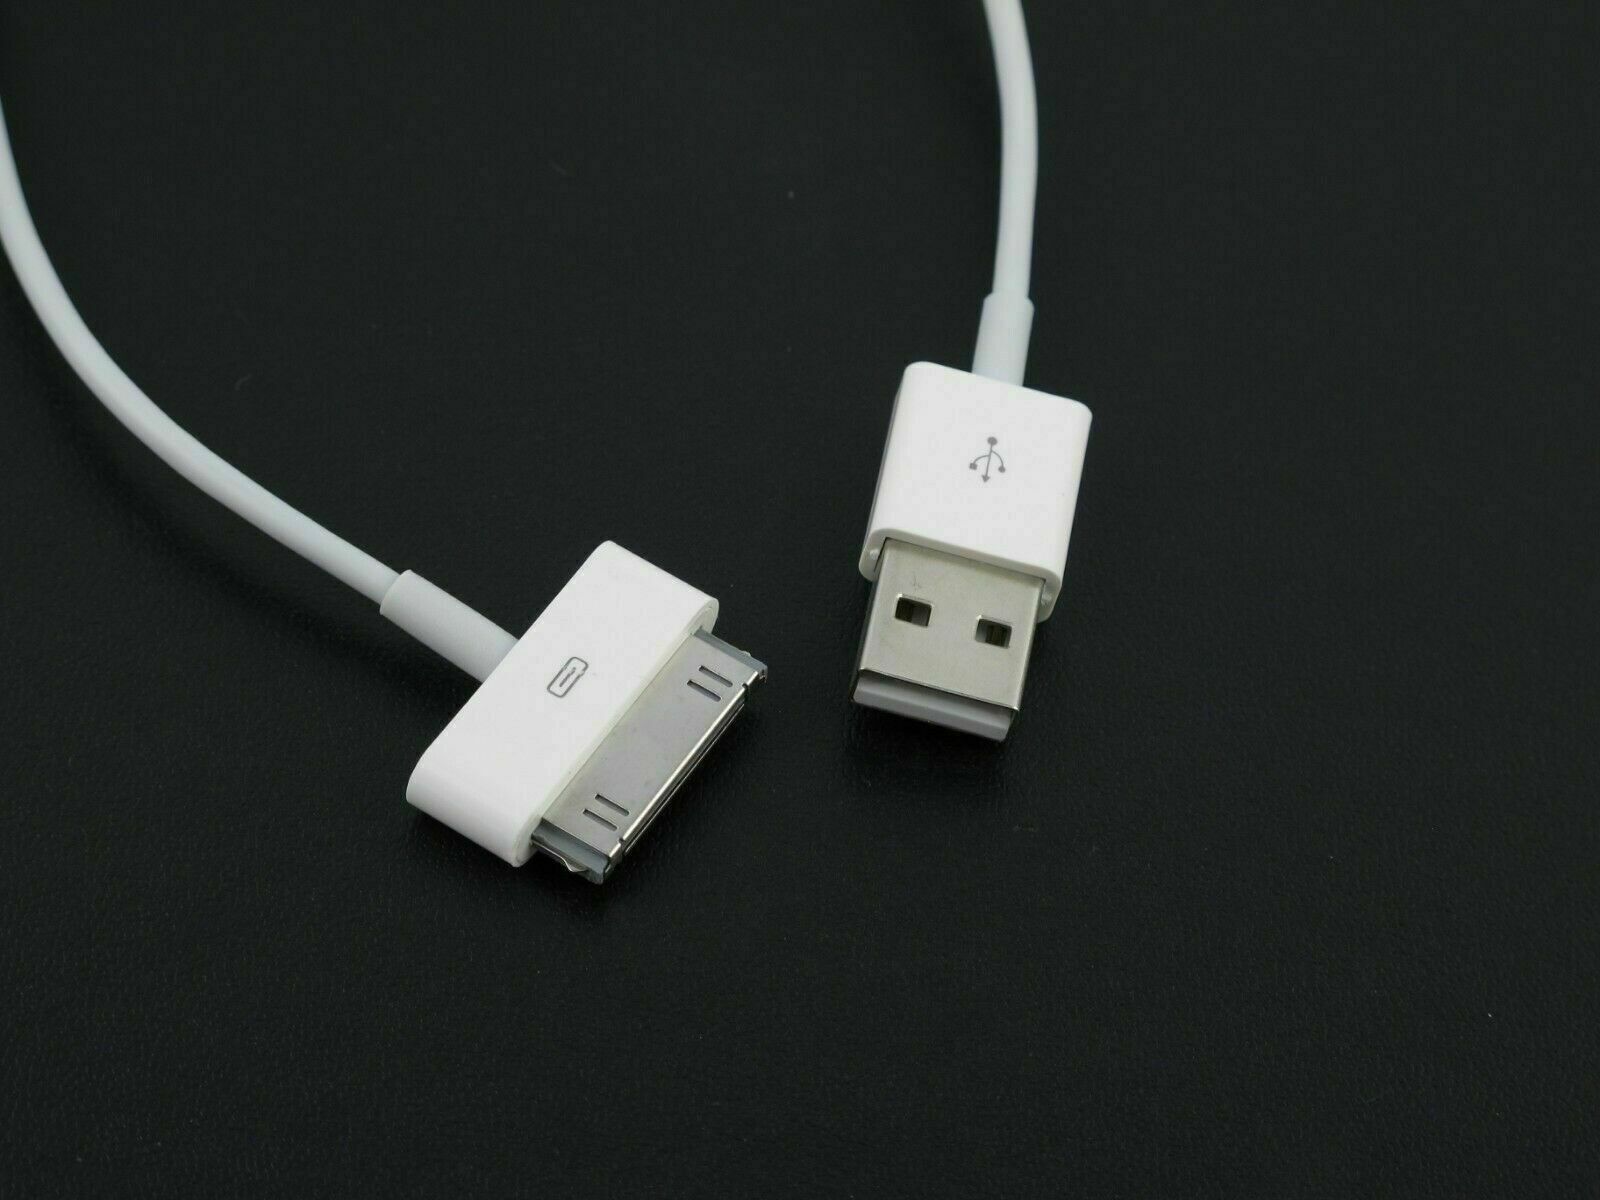 2 USB Charger Cable for Tablet Apple iPad 1 2 3 1st 2nd 3rd GEN Unbranded Does not apply - фотография #3